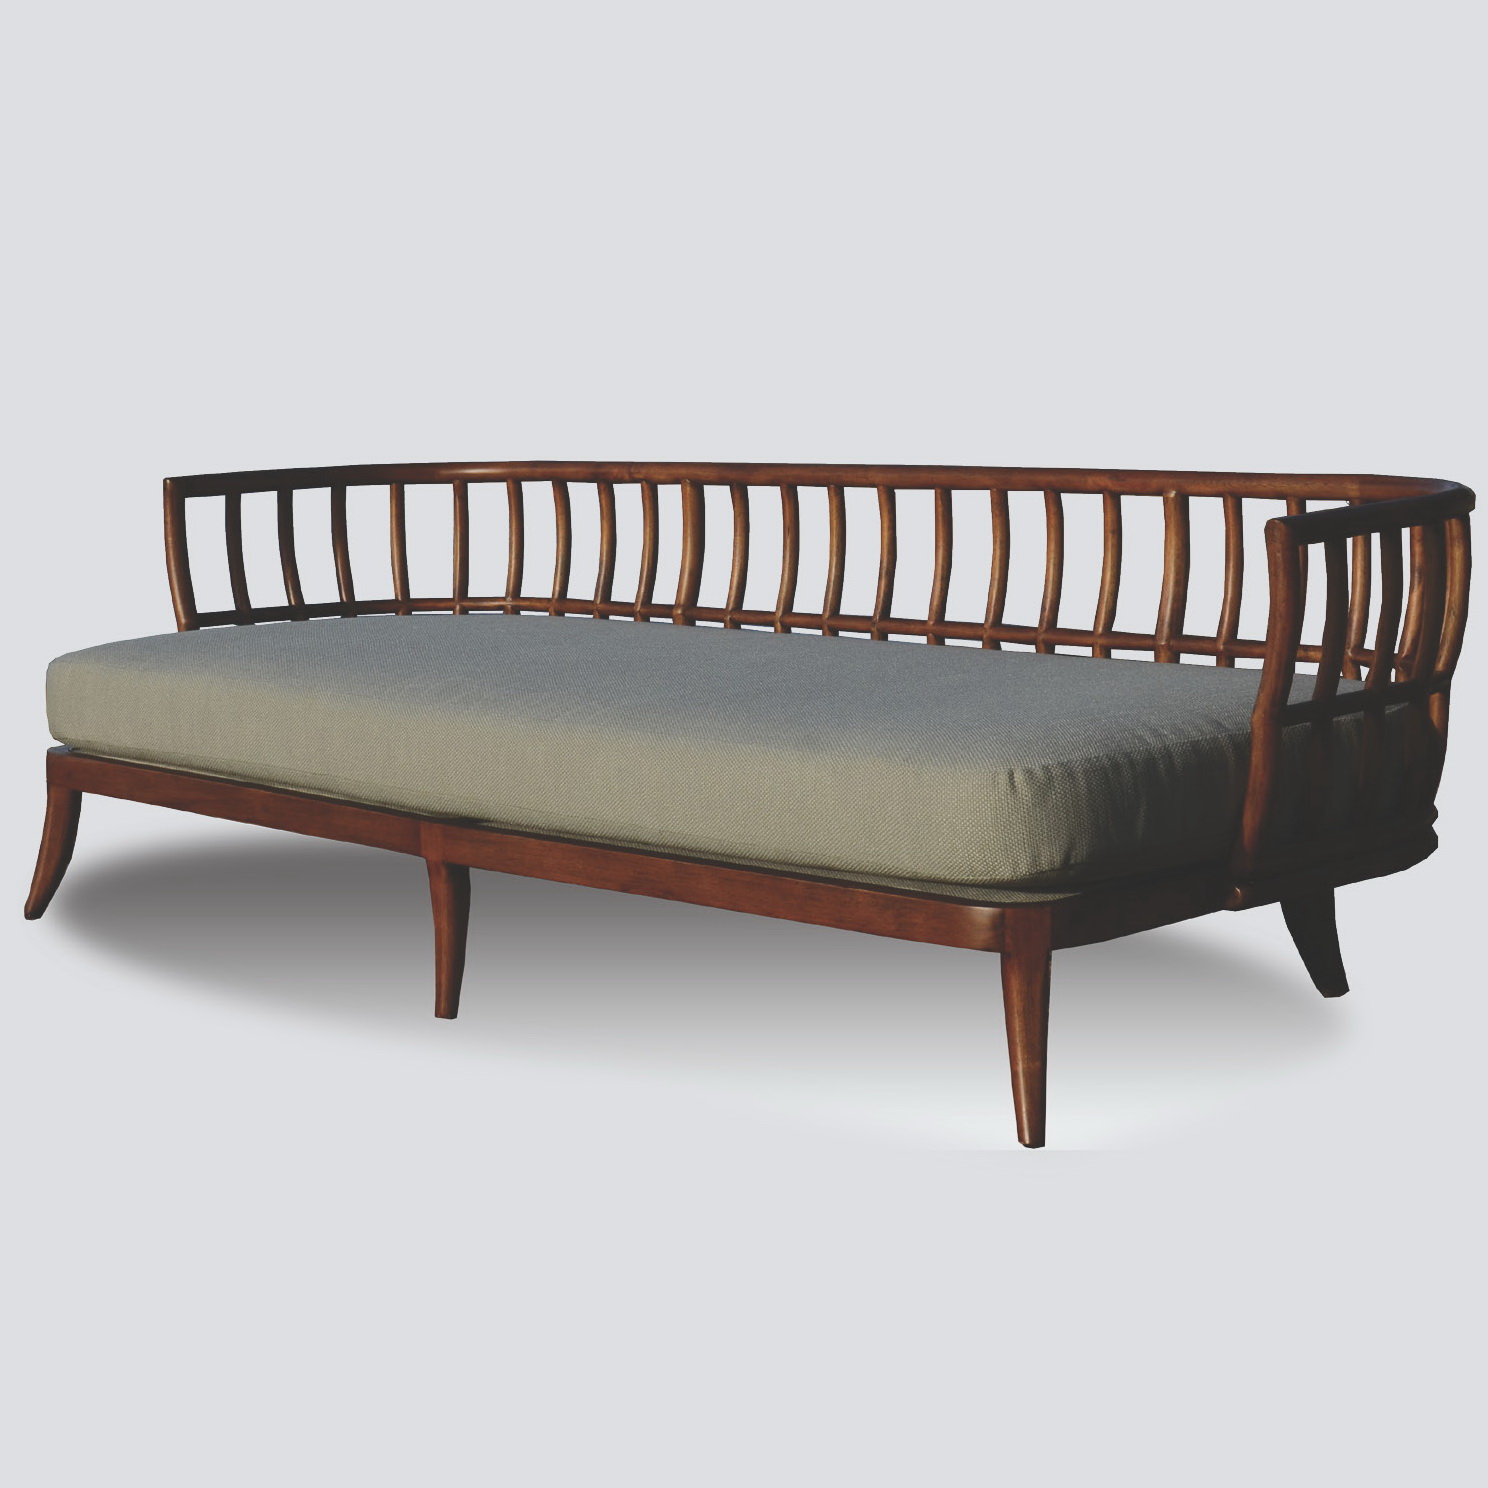 Tuscany Teak Daybed Living Room